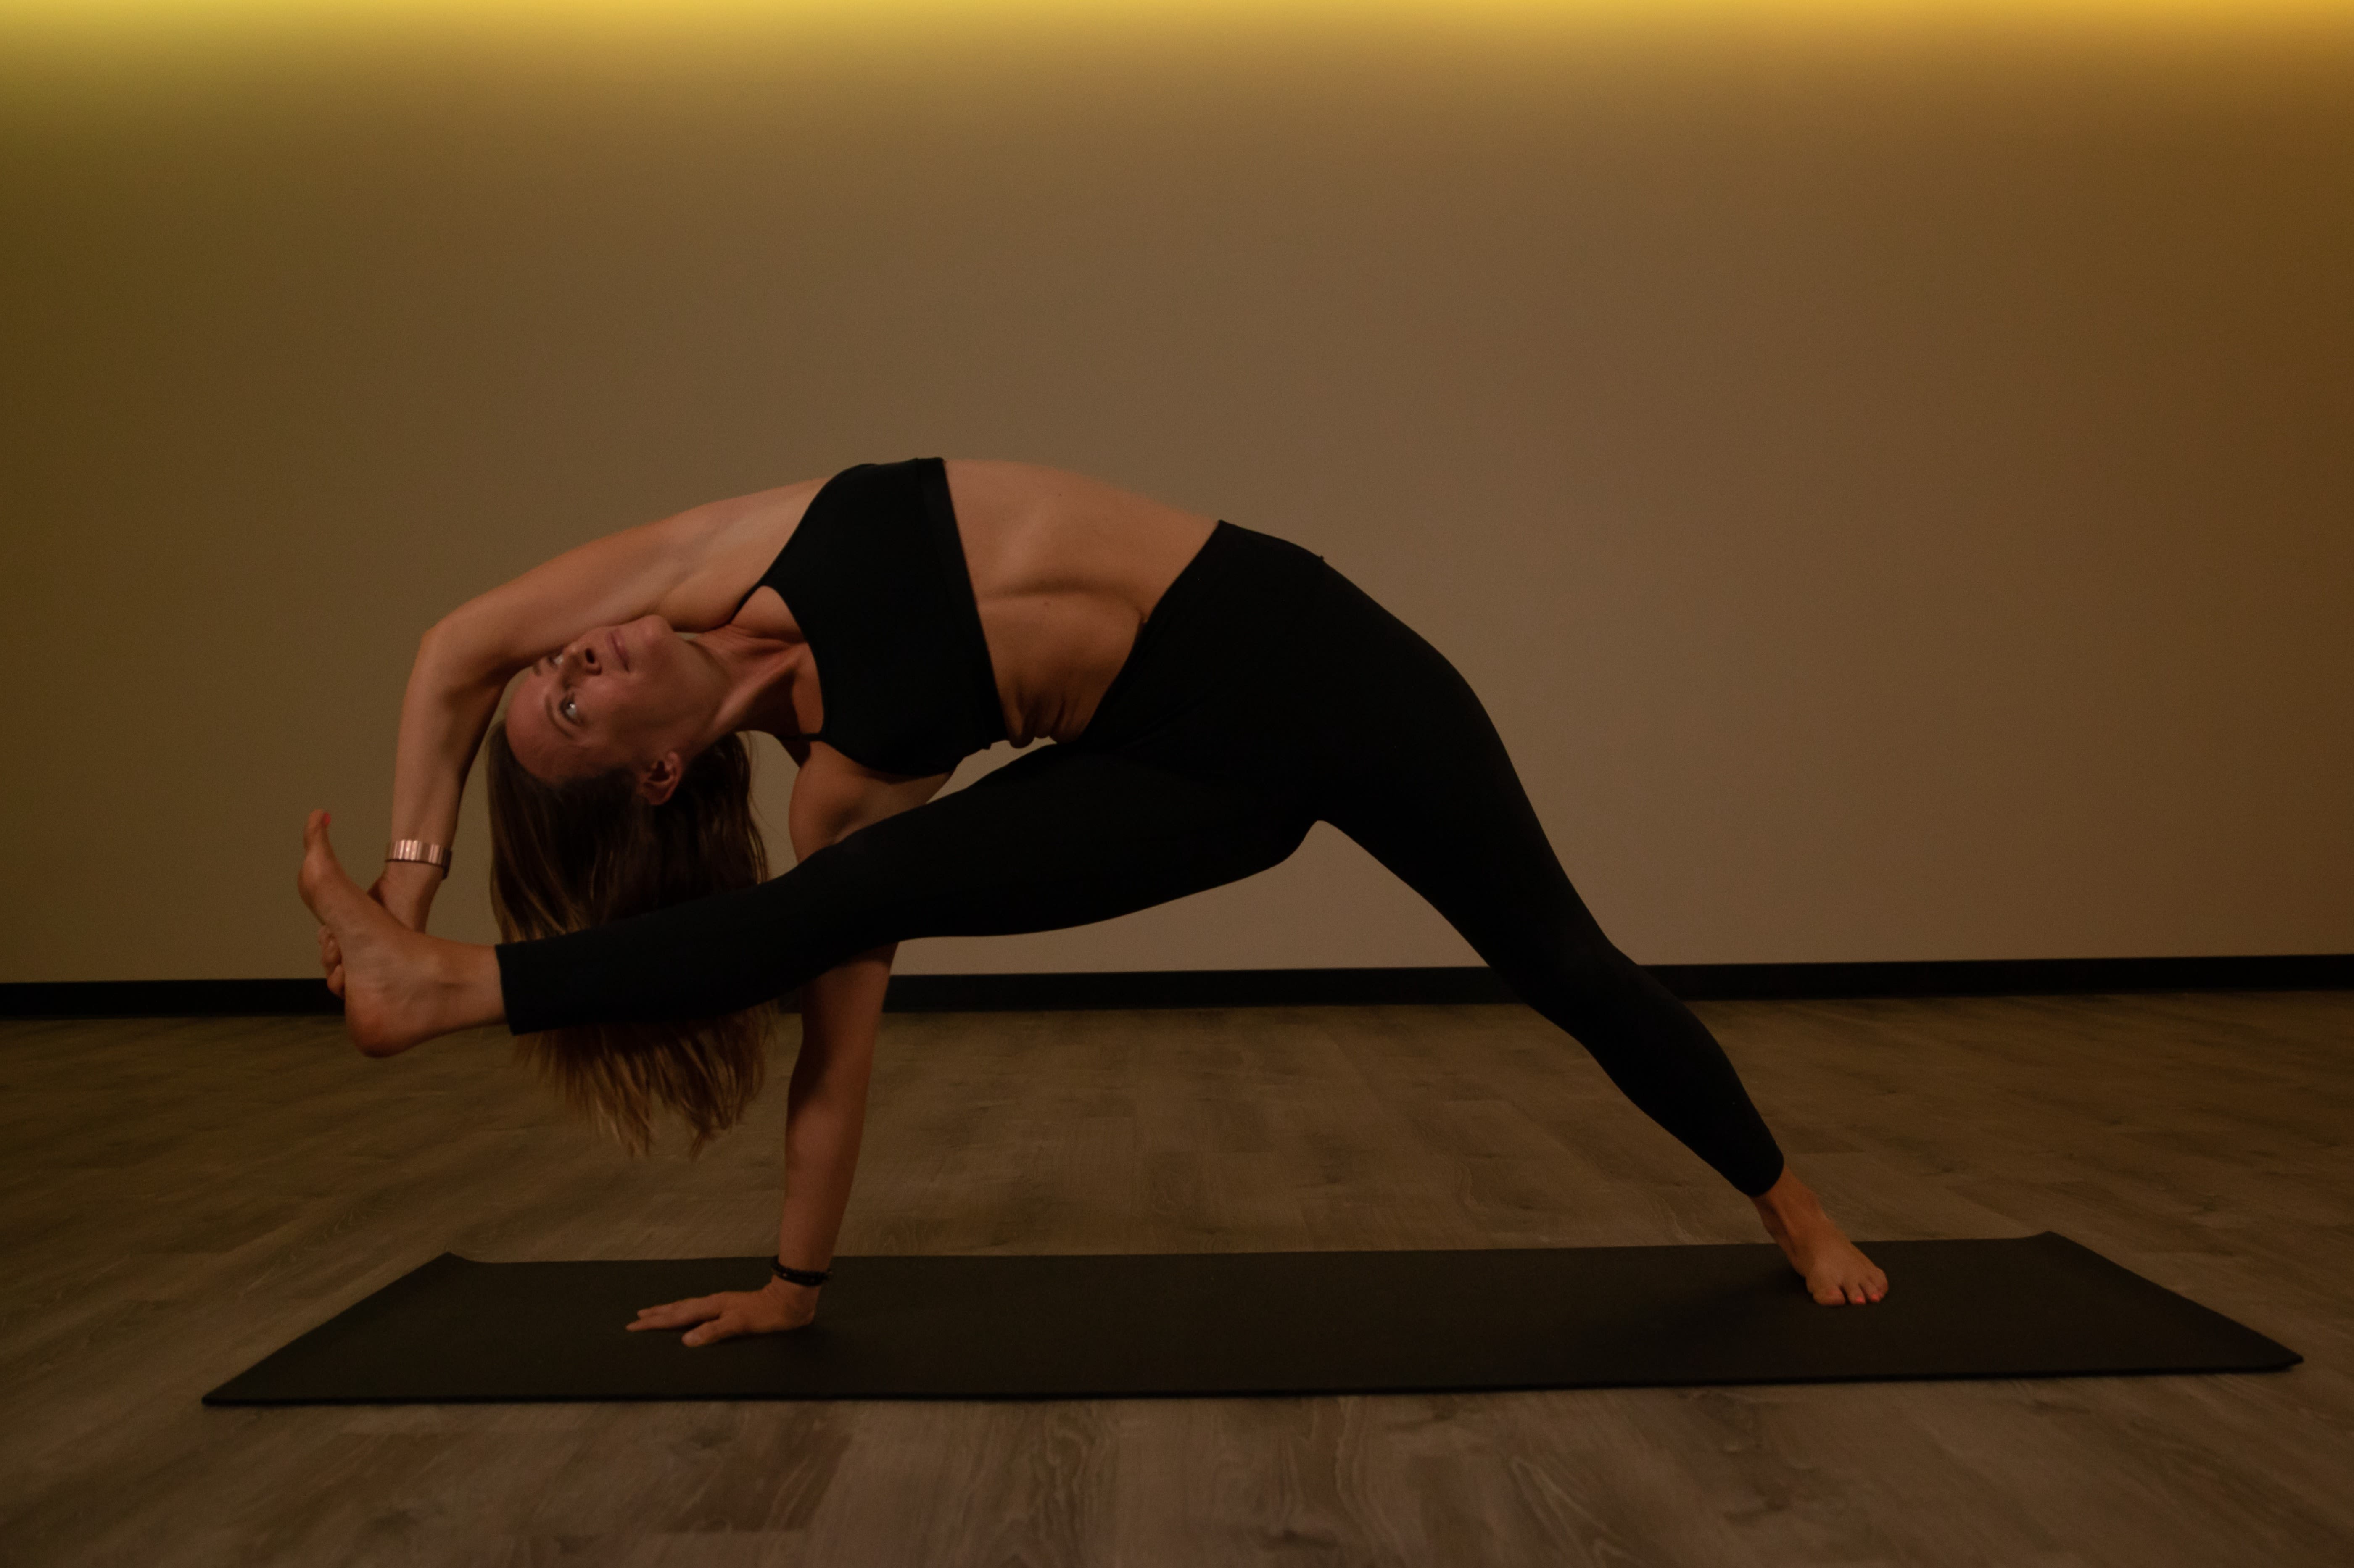 Lotus Yoga - Demers: Read Reviews and Book Classes on ClassPass